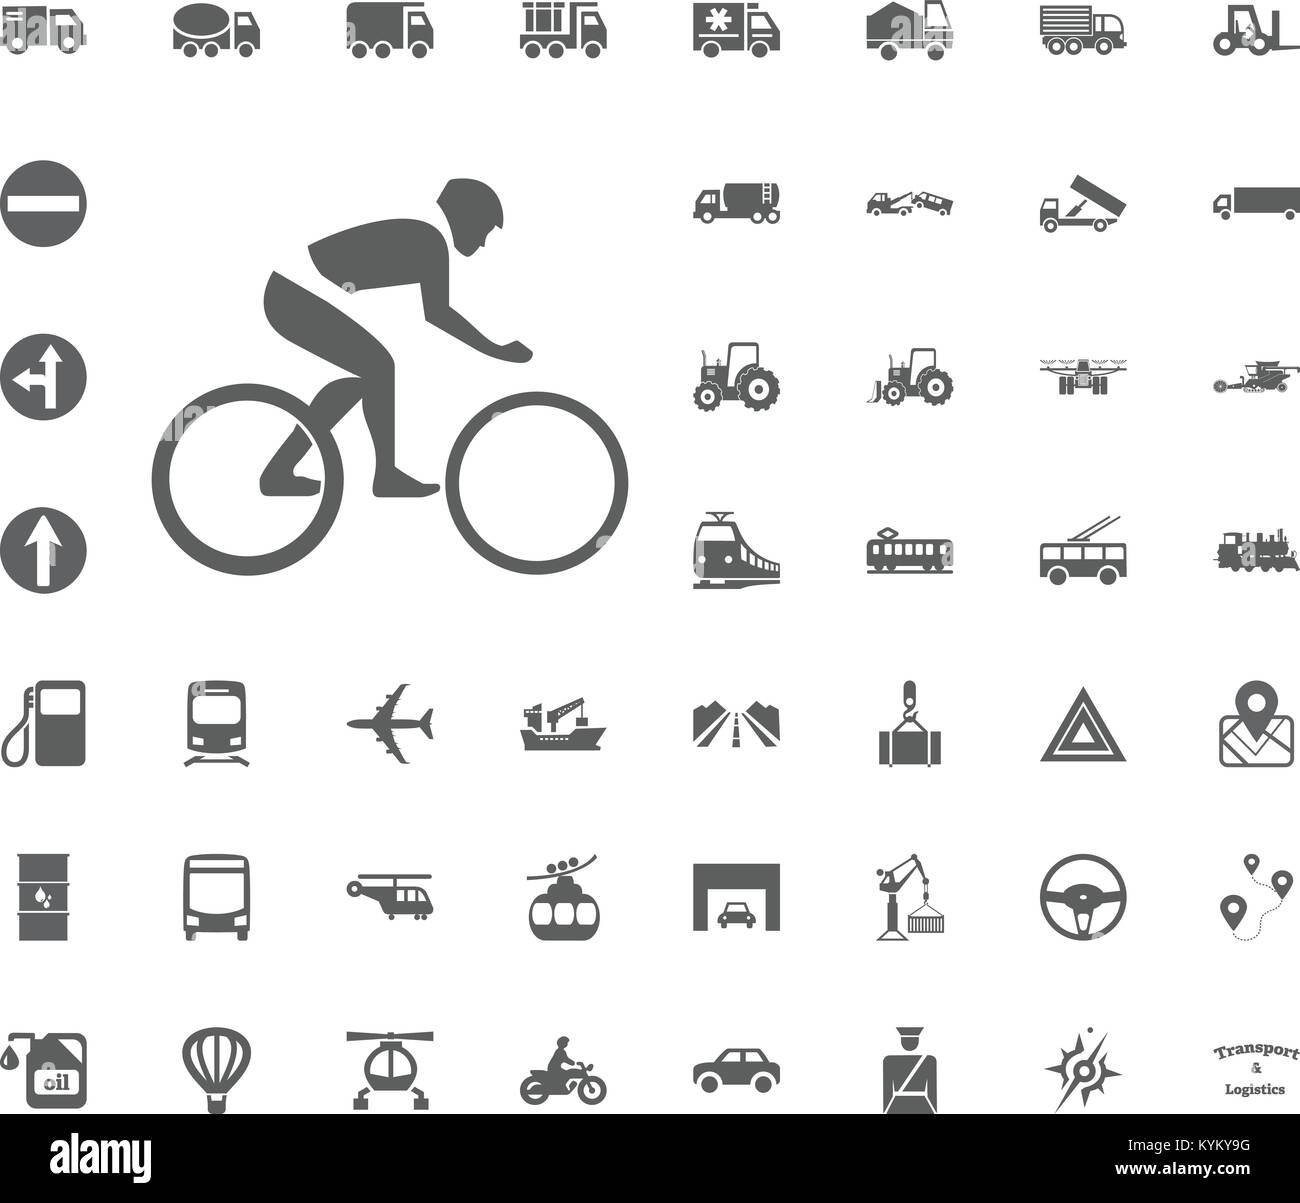 Cycle icon. Transport and Logistics set icons. Transportation set icons. Stock Vector